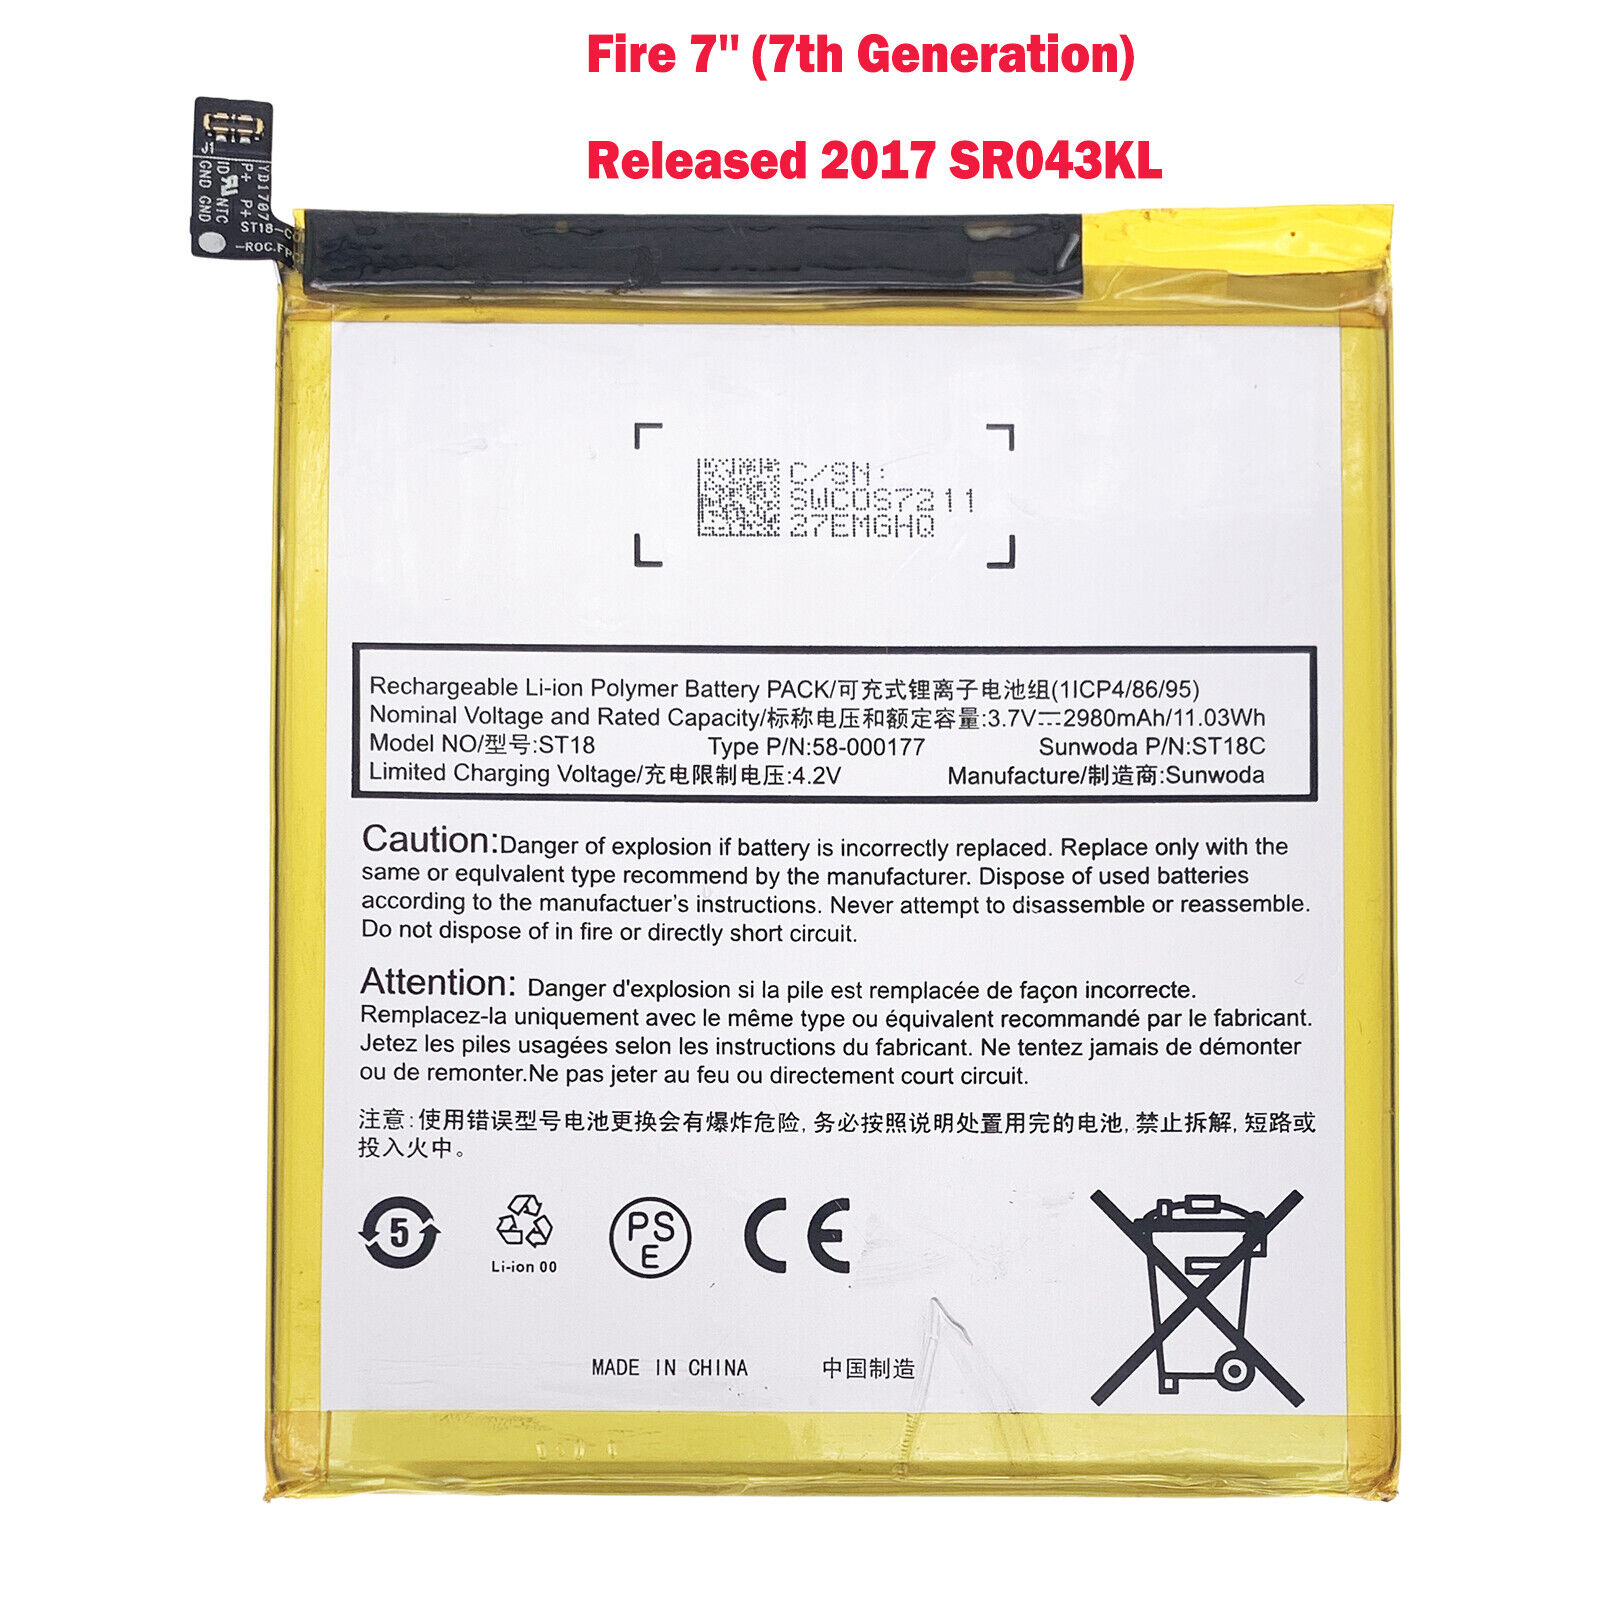 ST18 58-000177 GB-S10-308594-060L Battery for Amazon Kindle Fire 7th Gen ST18C